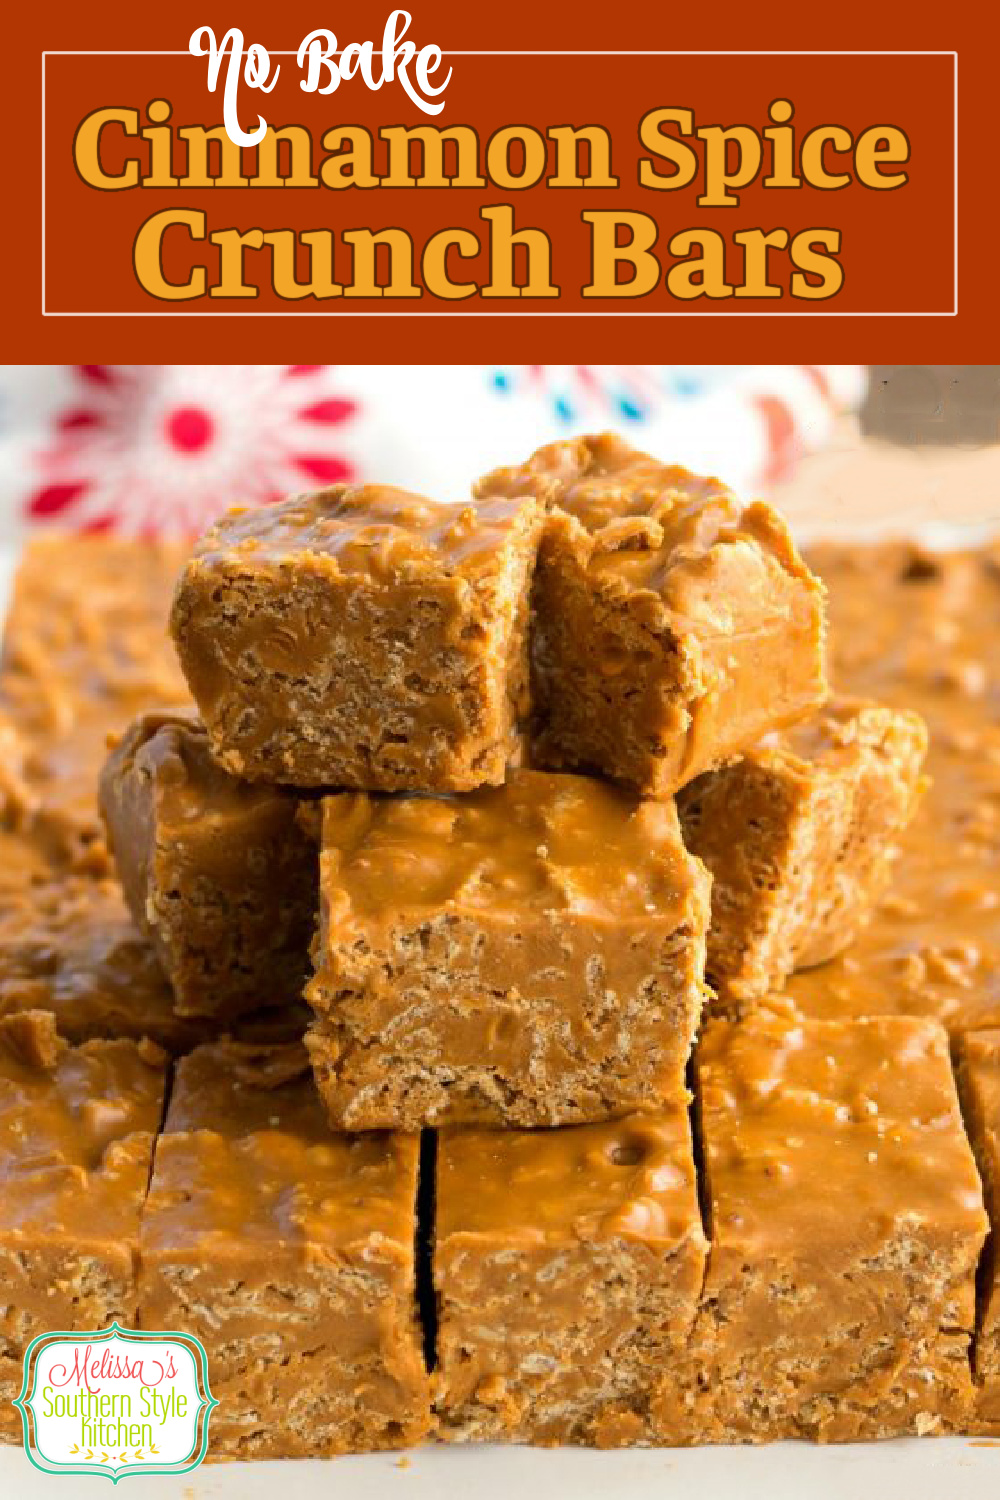 These No-Bake Cinnamon Spice Crunch Bars will warm you up from the inside out #cinnamonbars #cinnamonspicebars #nobakecandybars #nobakecinnamonbars #cinnamoncrunchbars